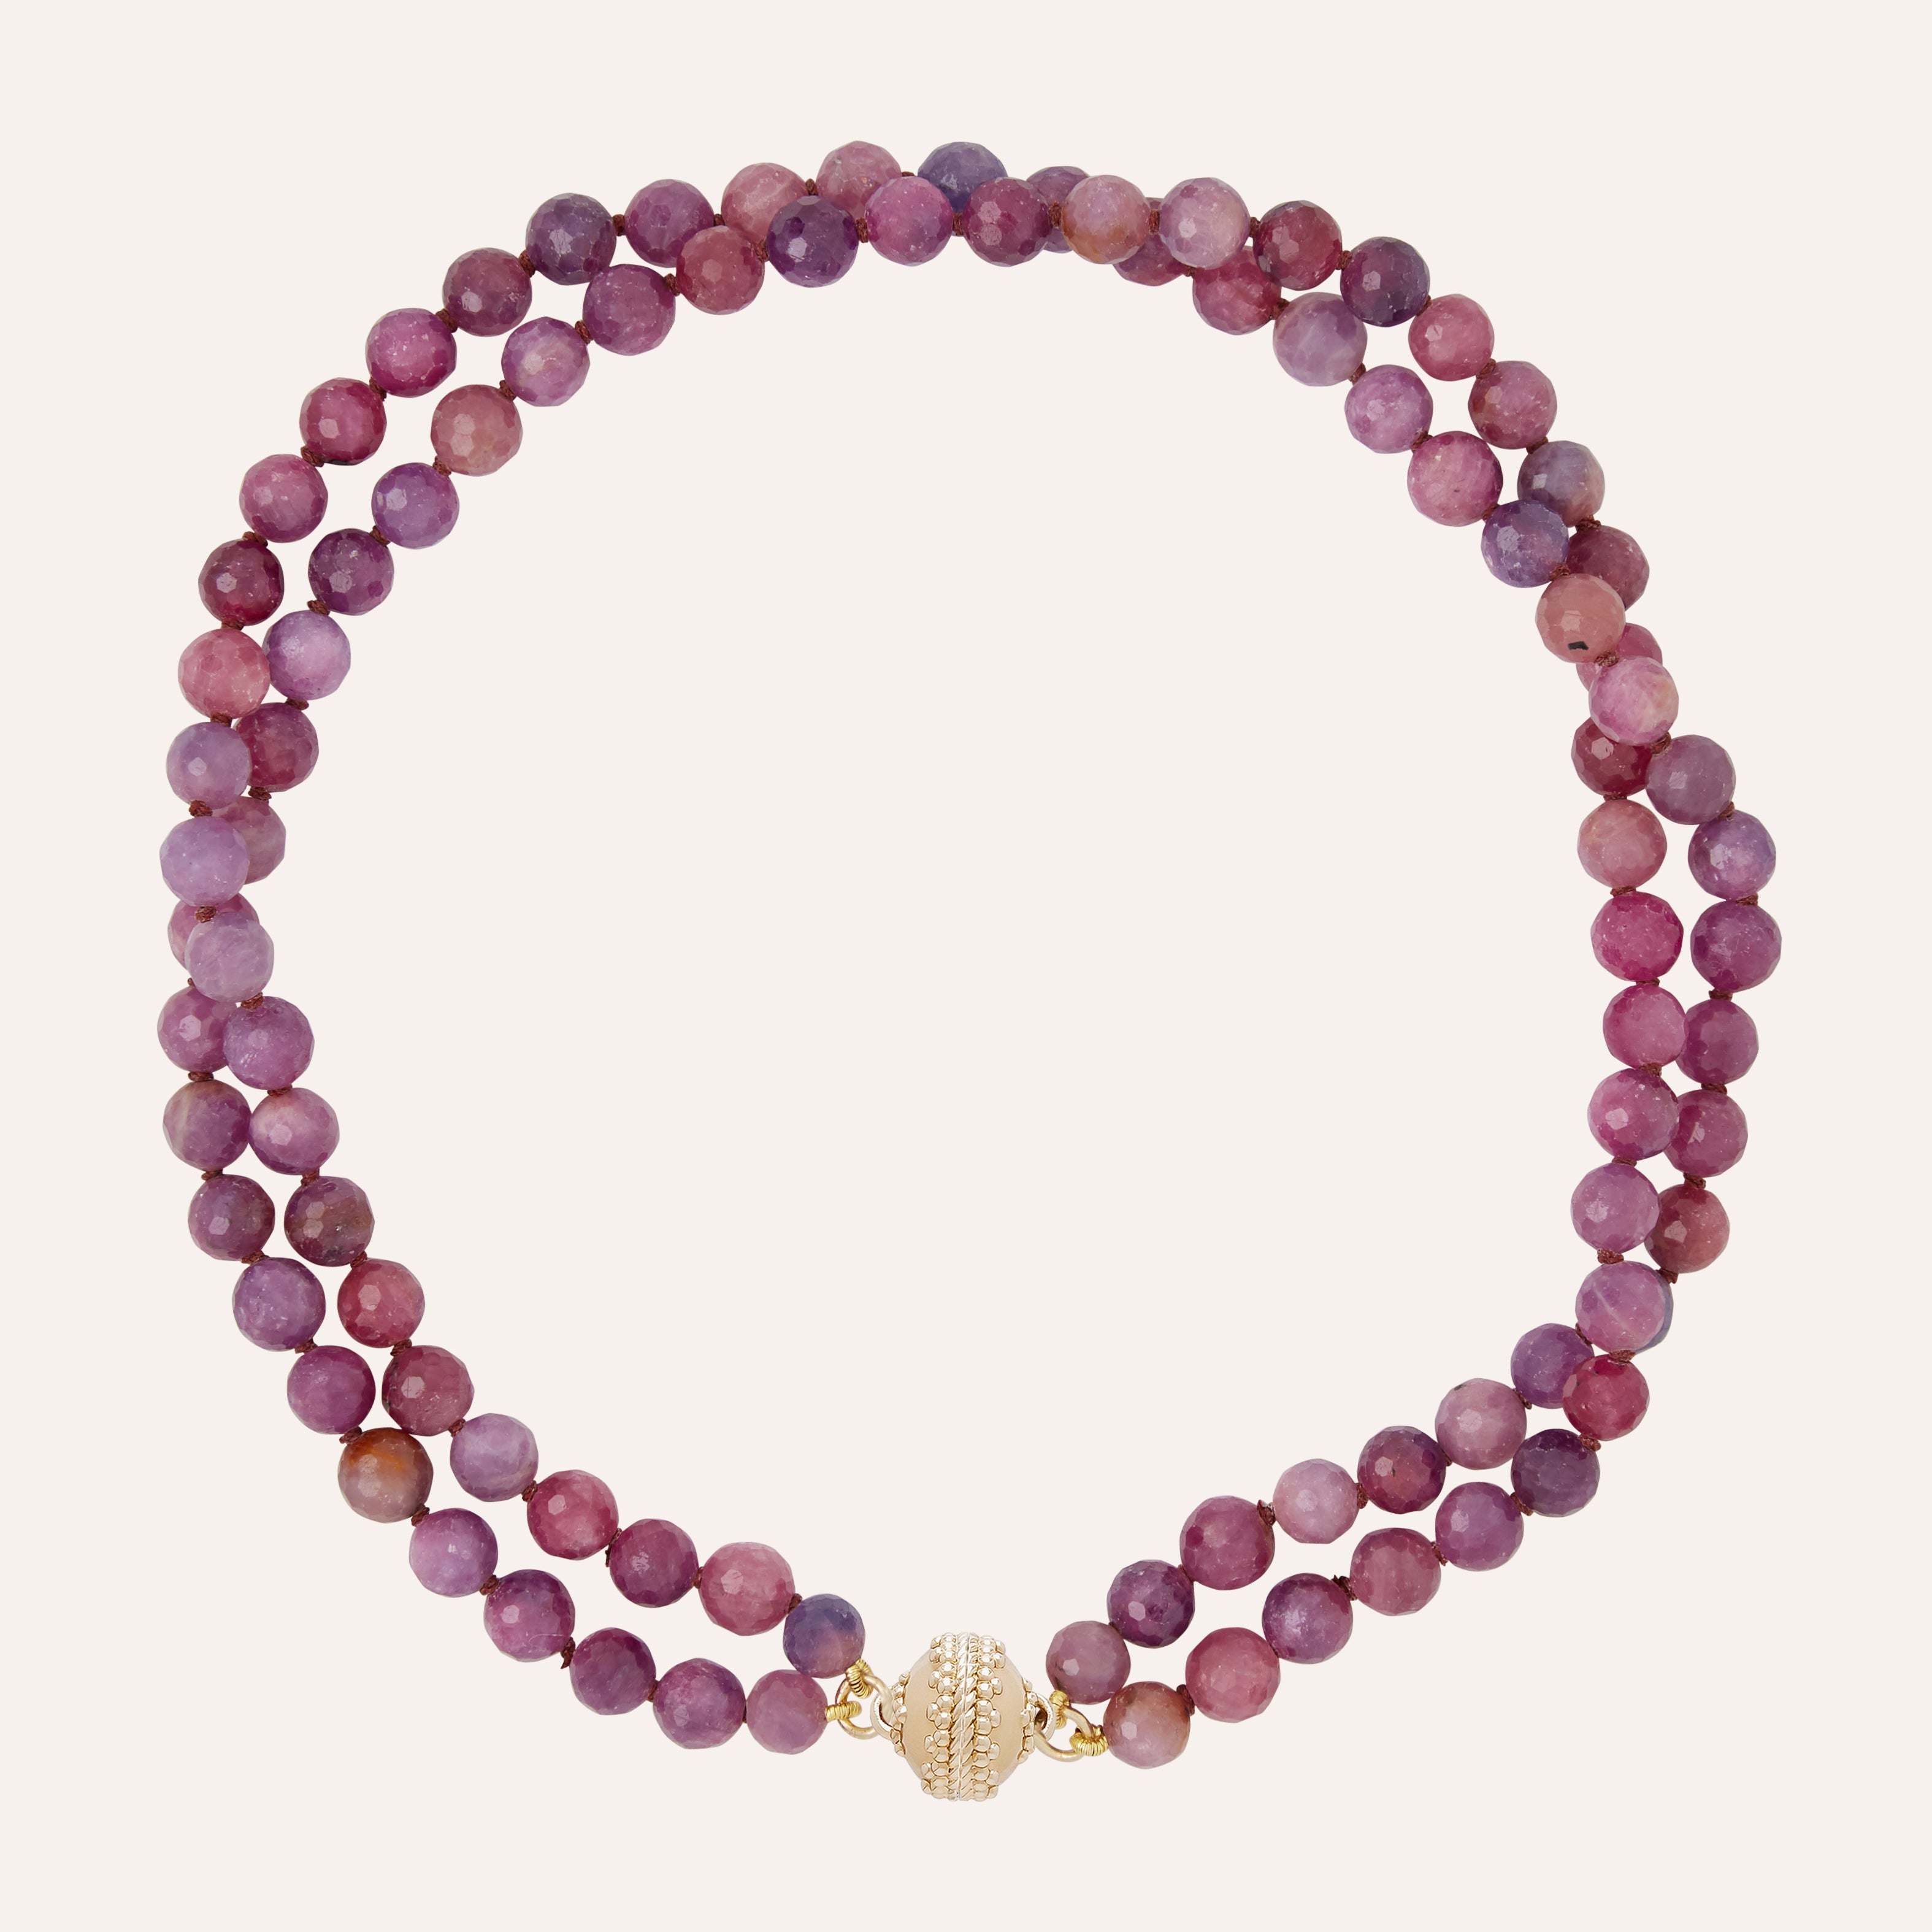 Victoire Ruby Faceted 8mm Double Strand Necklace